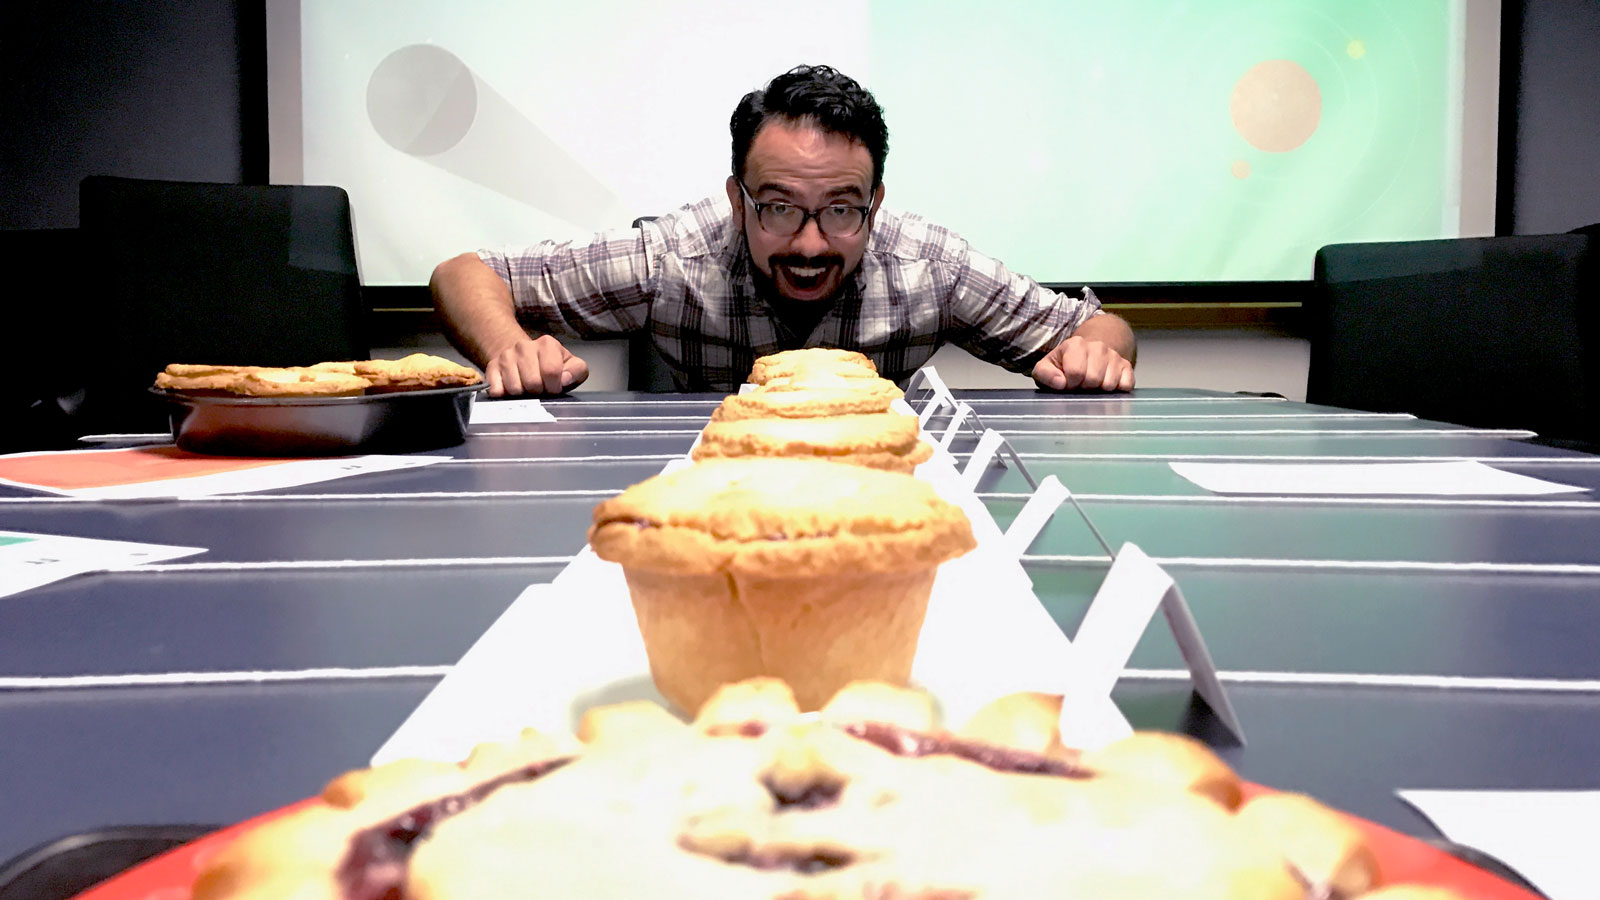 Smiling man with a beautiful row of tasty pies.